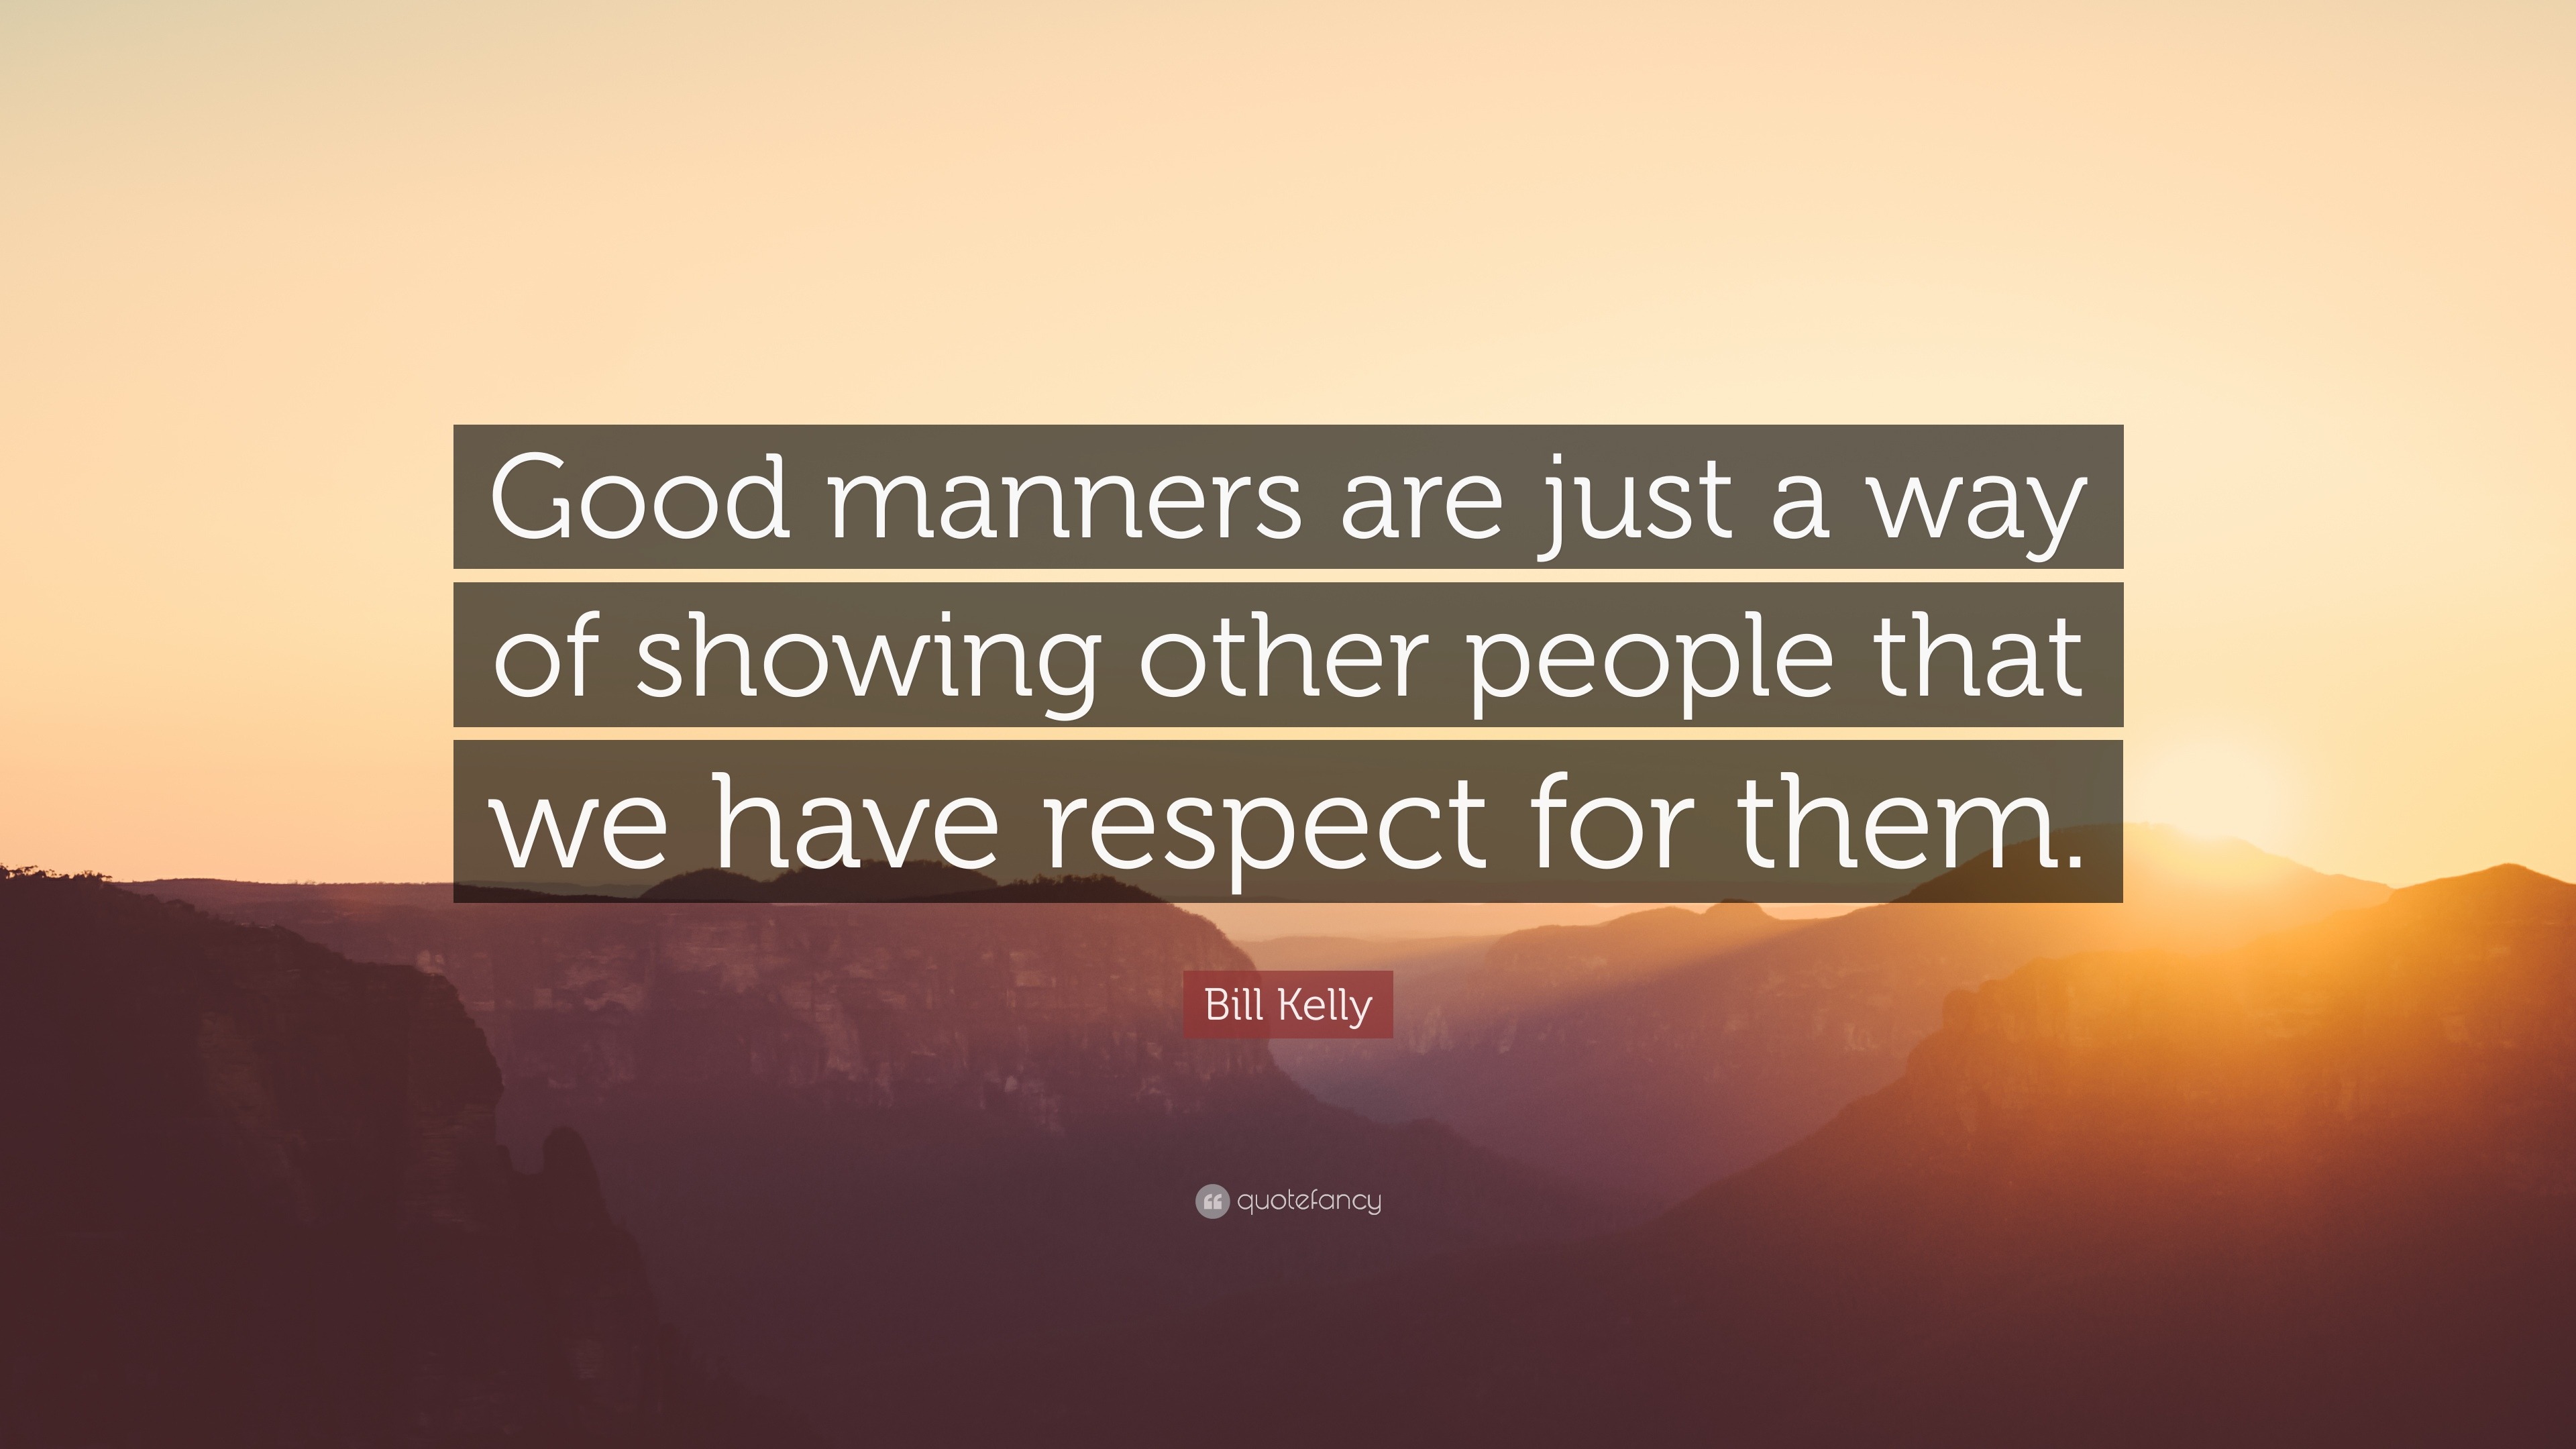 Bill Kelly Quote: “Good manners are just a way of showing other people